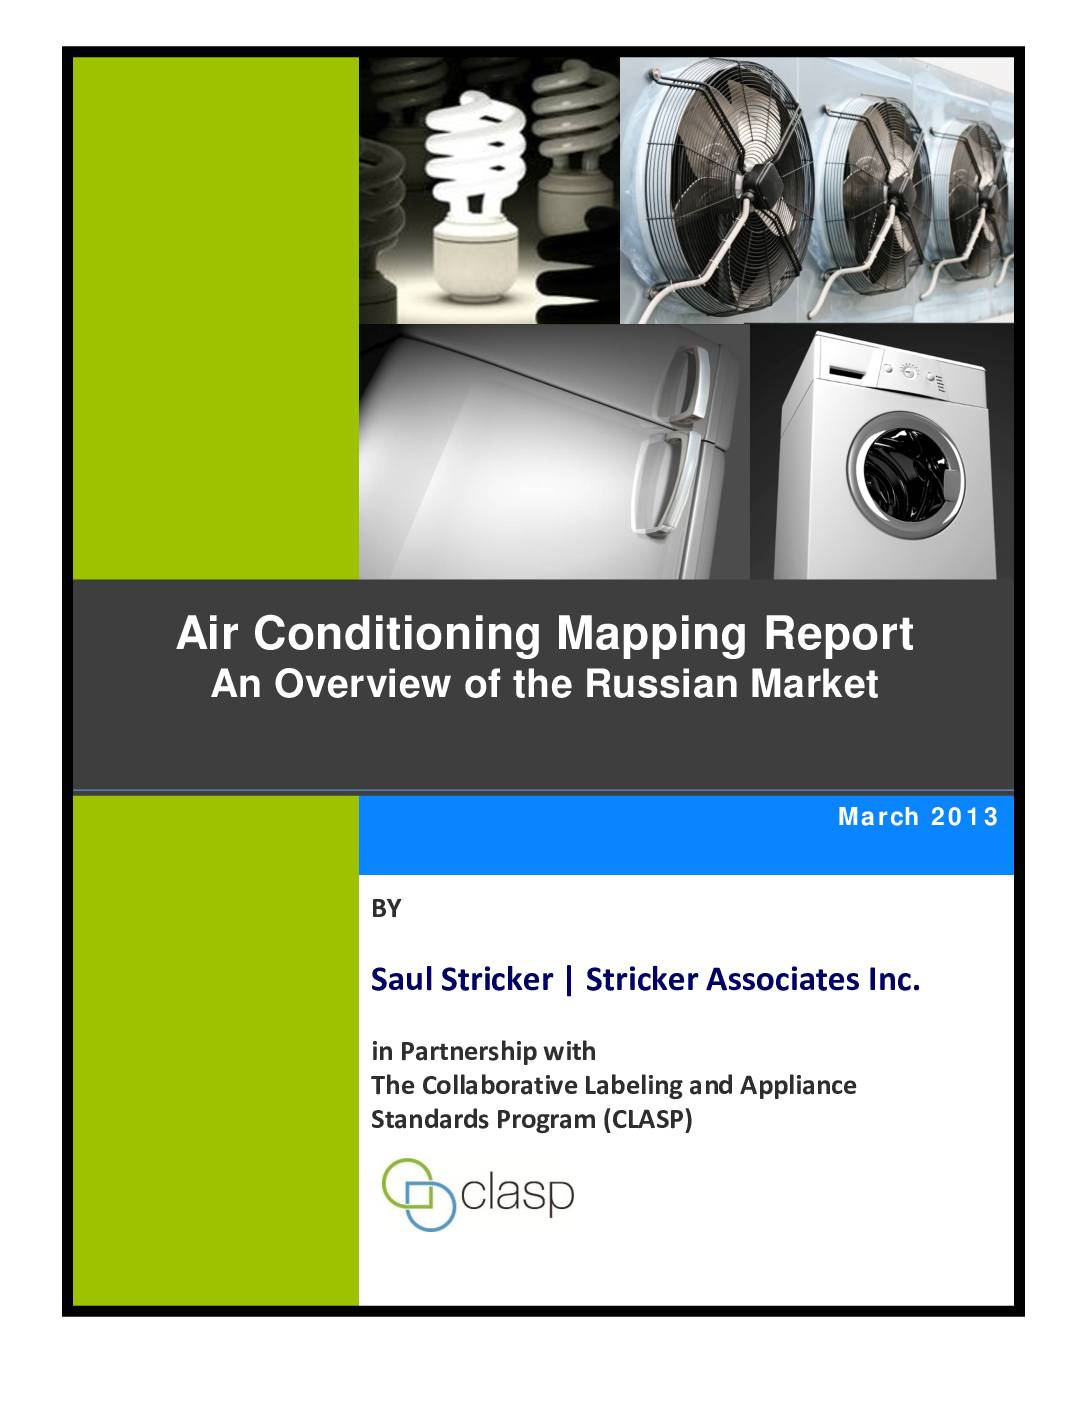 Air Conditioning Mapping Report: An Overview of the Russian Market